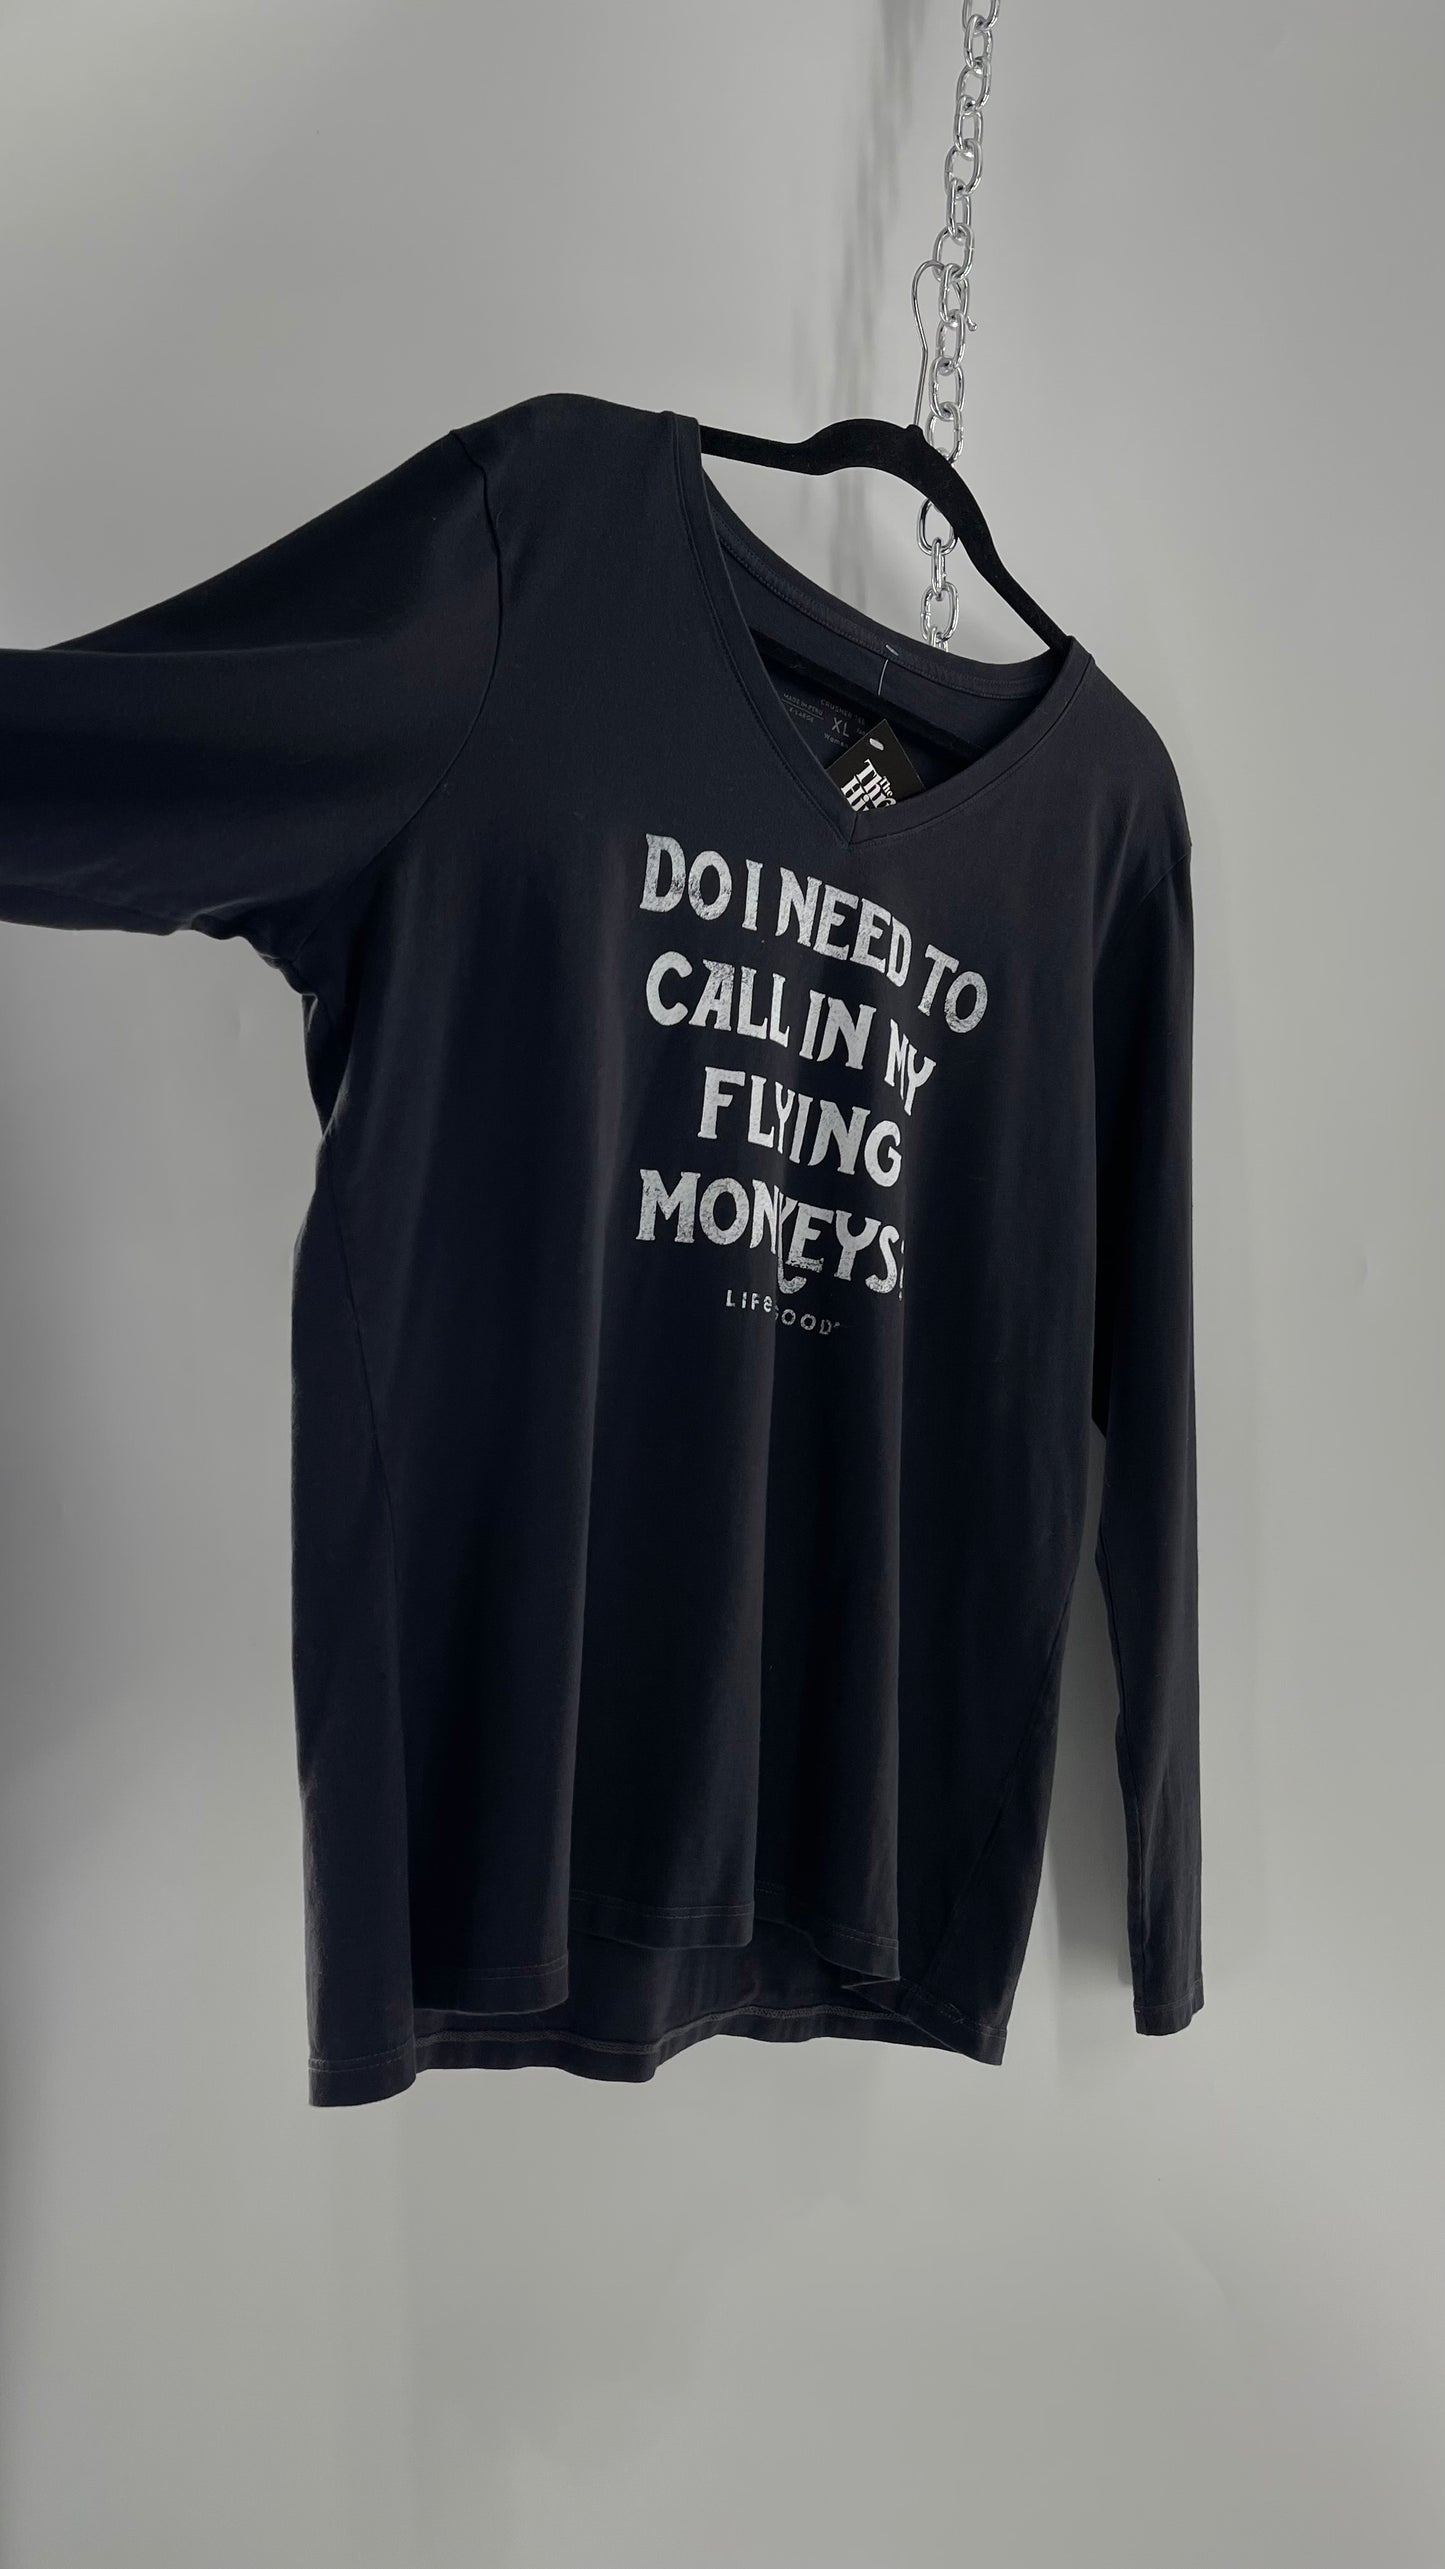 LIFE IS GOOD “Do I need to call in my Flying Monkeys?” T Shirt (XL)